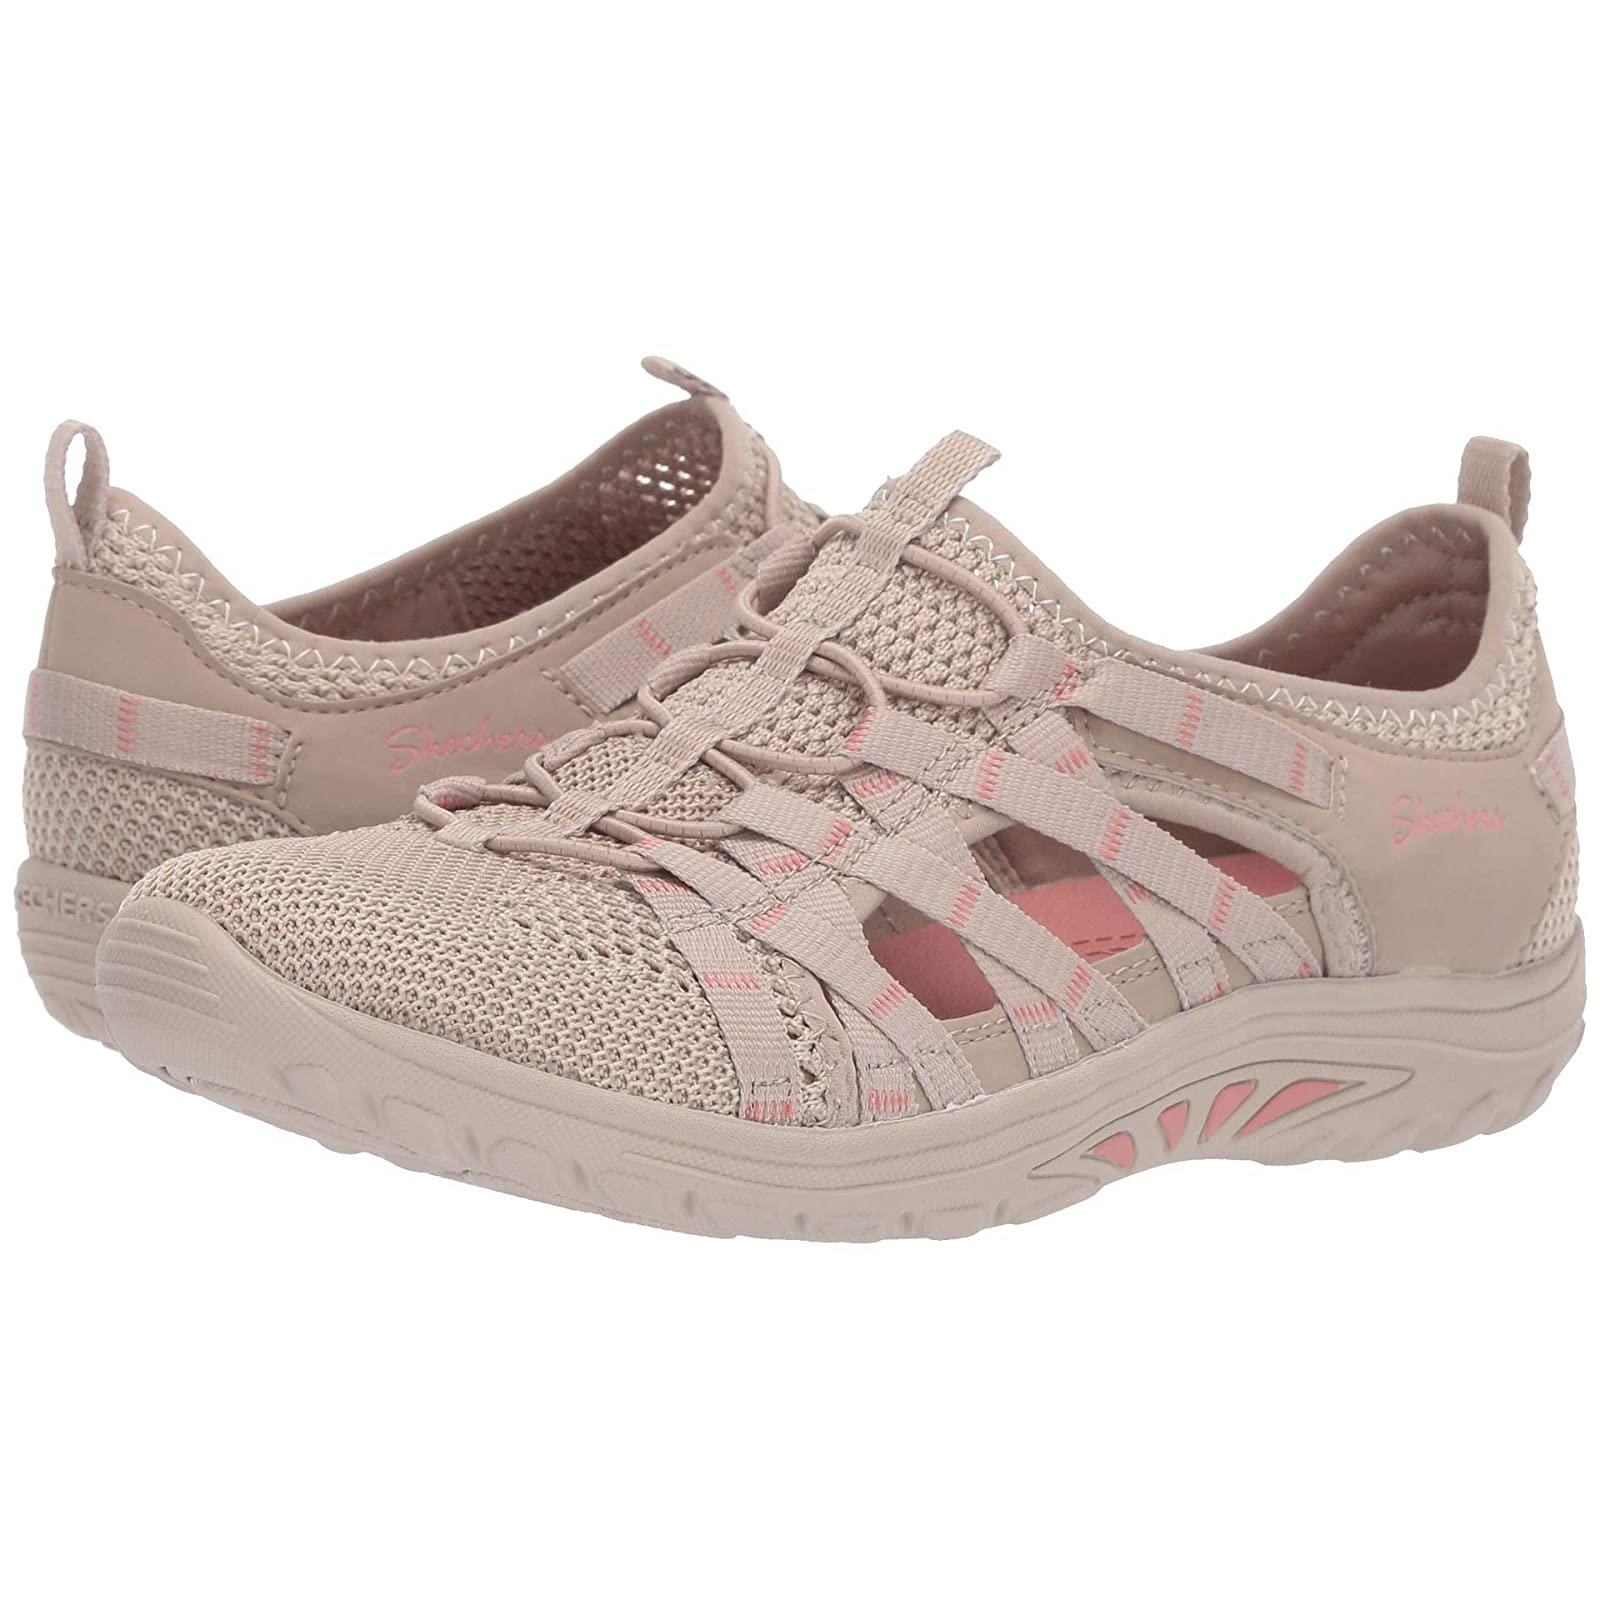 Woman`s Sneakers Athletic Shoes Skechers Reggae Fest - Neap Taupe